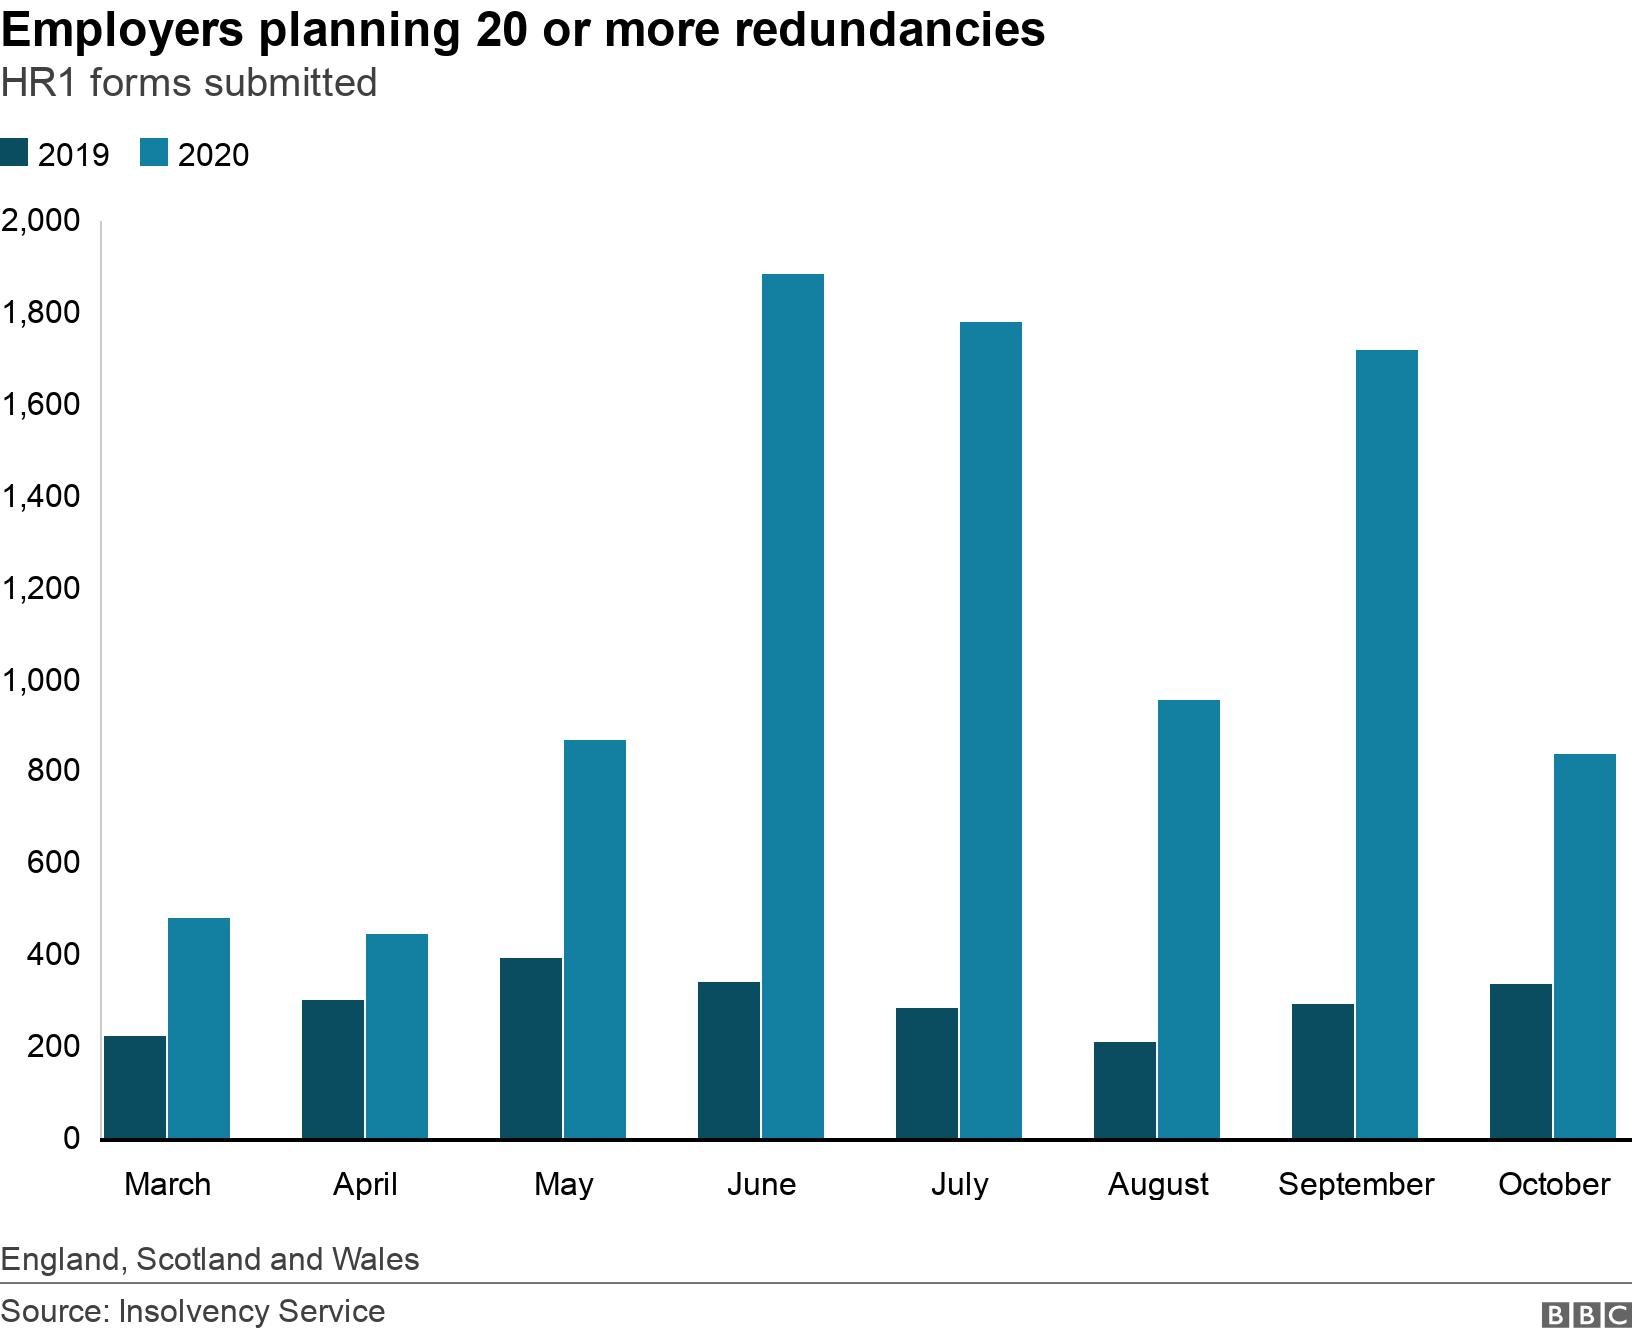 Employers planning 20 or more redundancies. HR1 forms submitted. The number of employers planning redundancies was close to 1800 in June, July and September. For October the number was lower, but still 150% up on October 2019. England, Scotland and Wales.